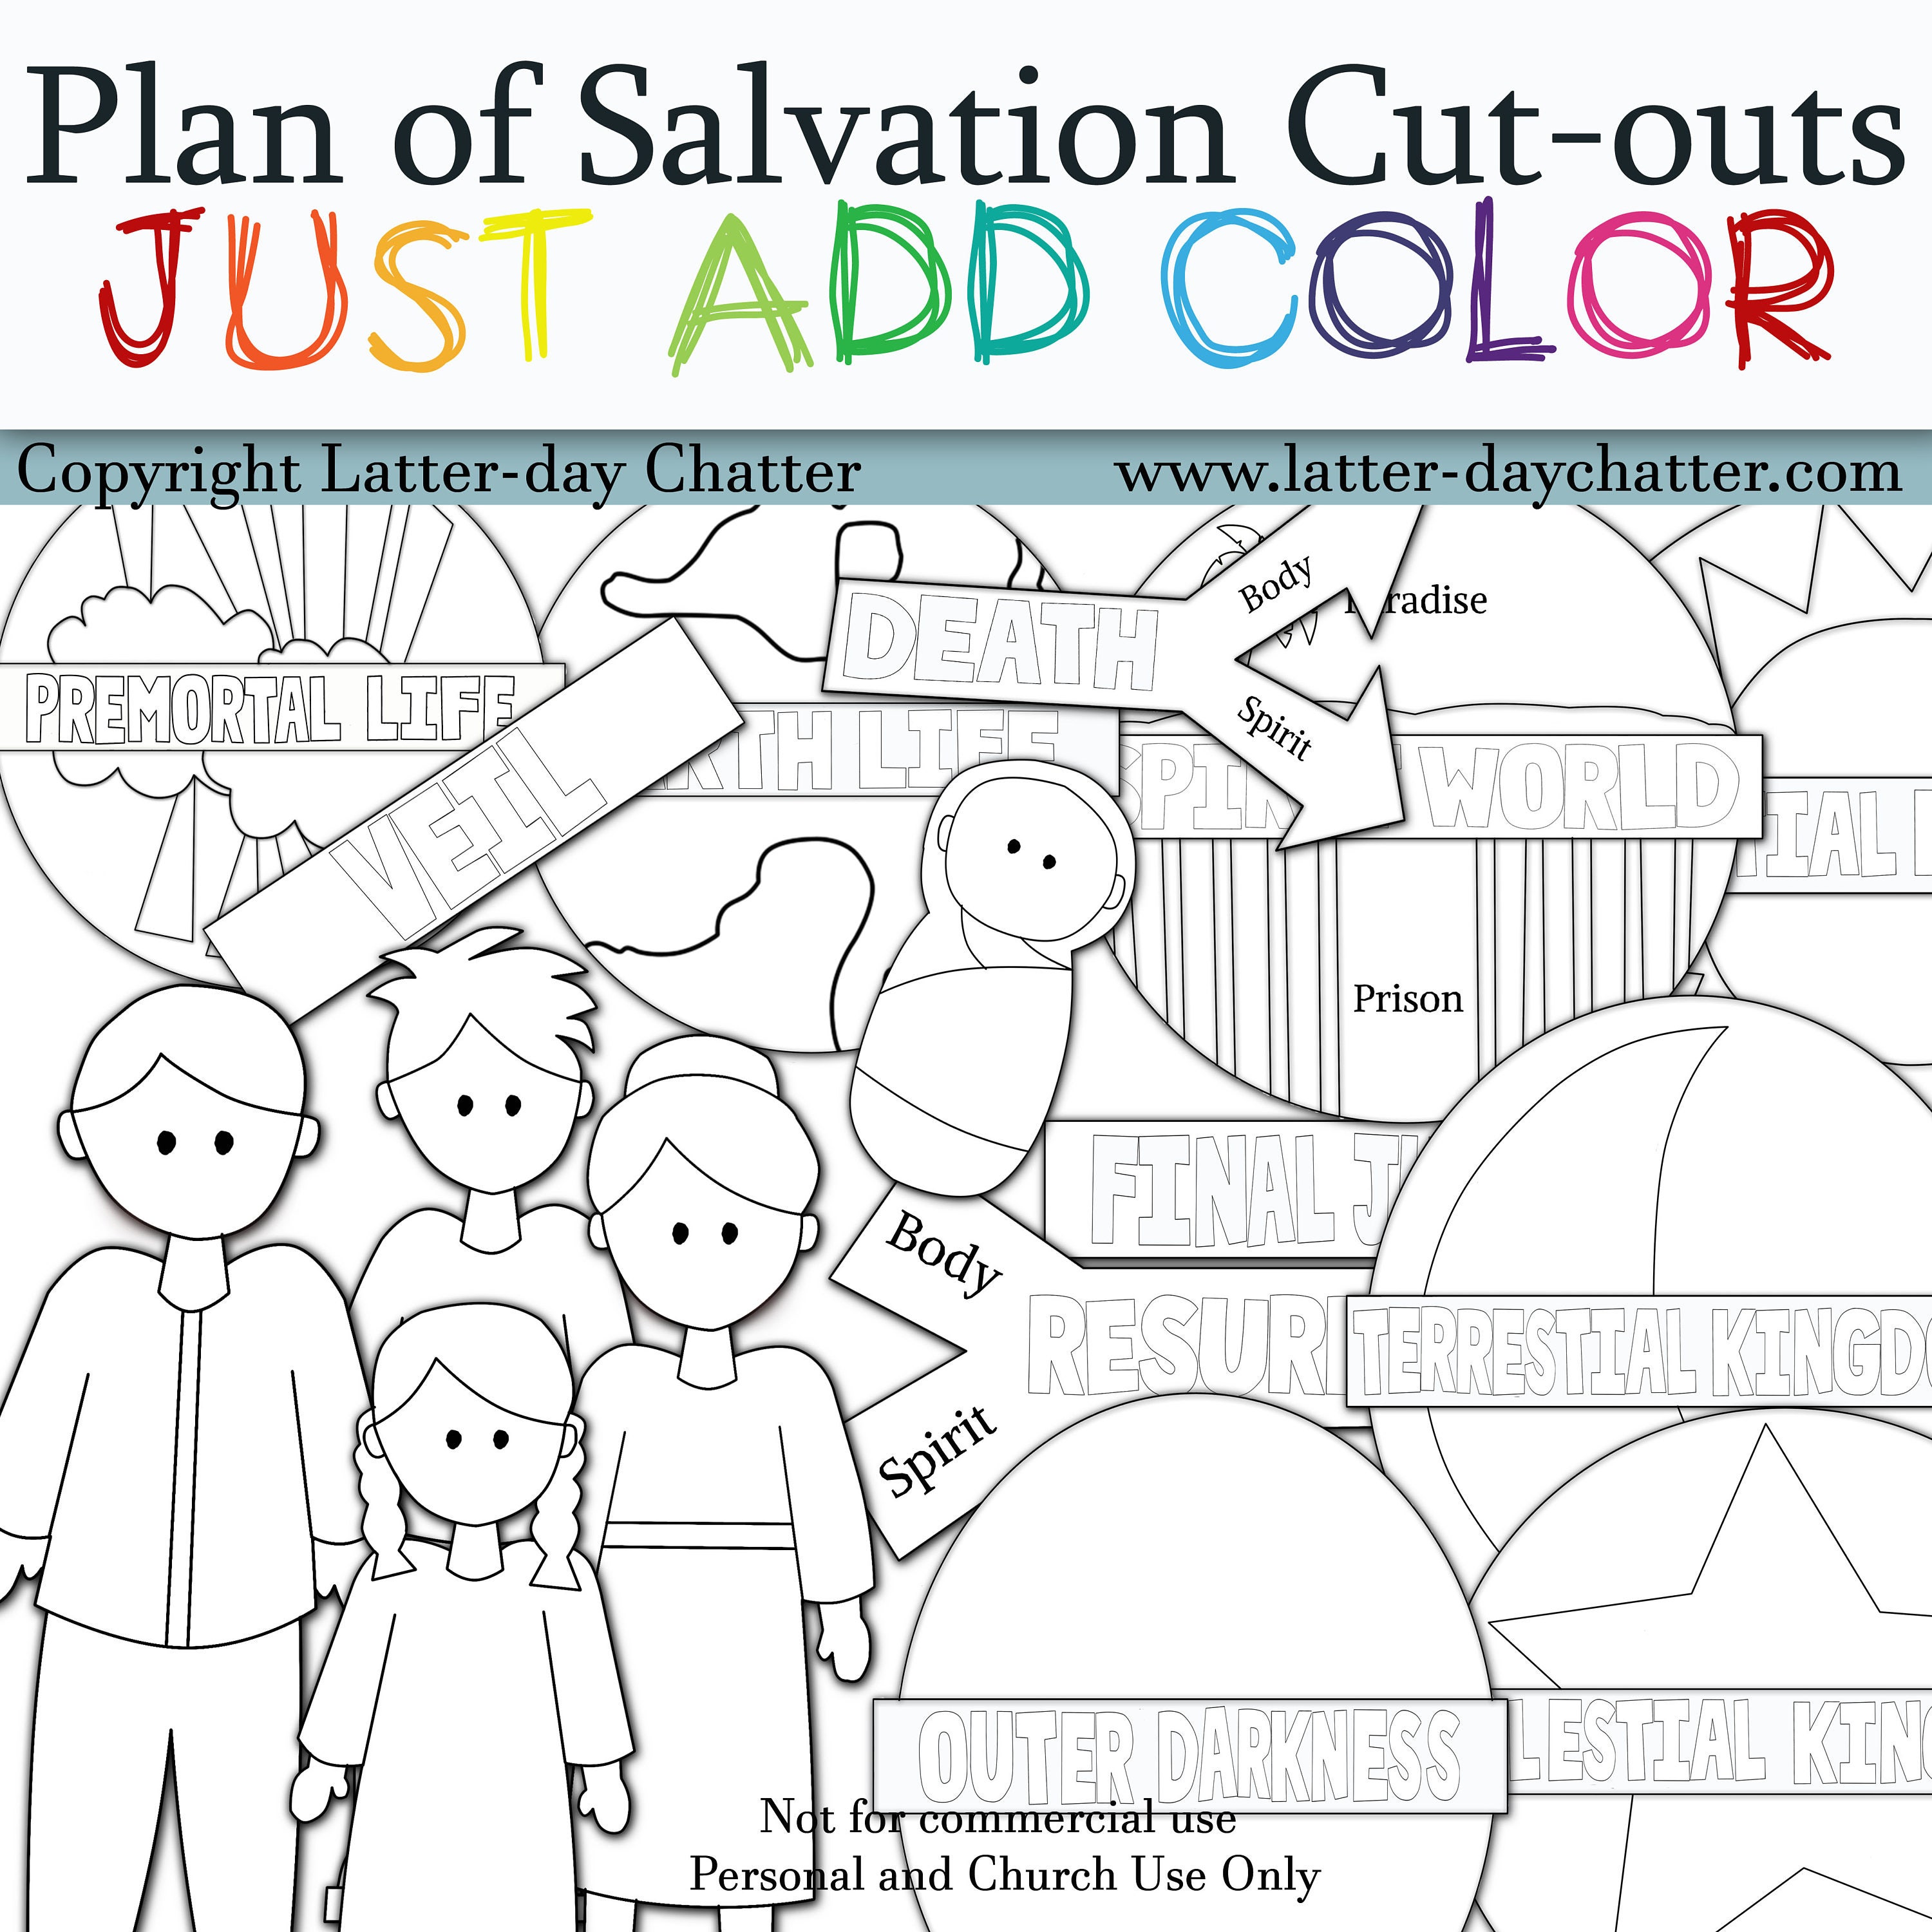 Plan of salvation just add color